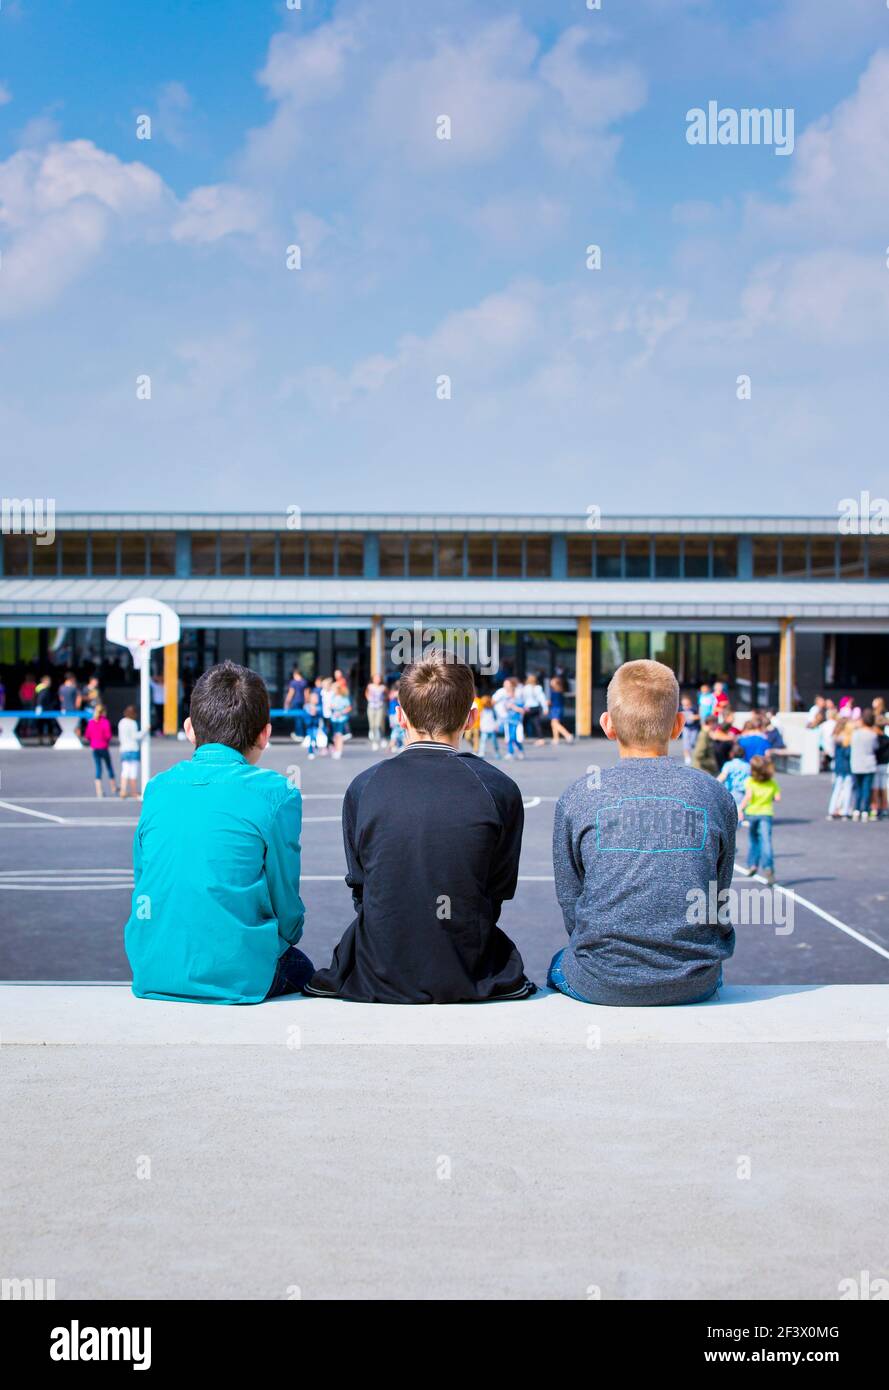 Atmosphere with pupils in the schoolyard of the “College Simone Veil” junior high school in Crevin (Brittany, north-western France). Three boys viewed Stock Photo